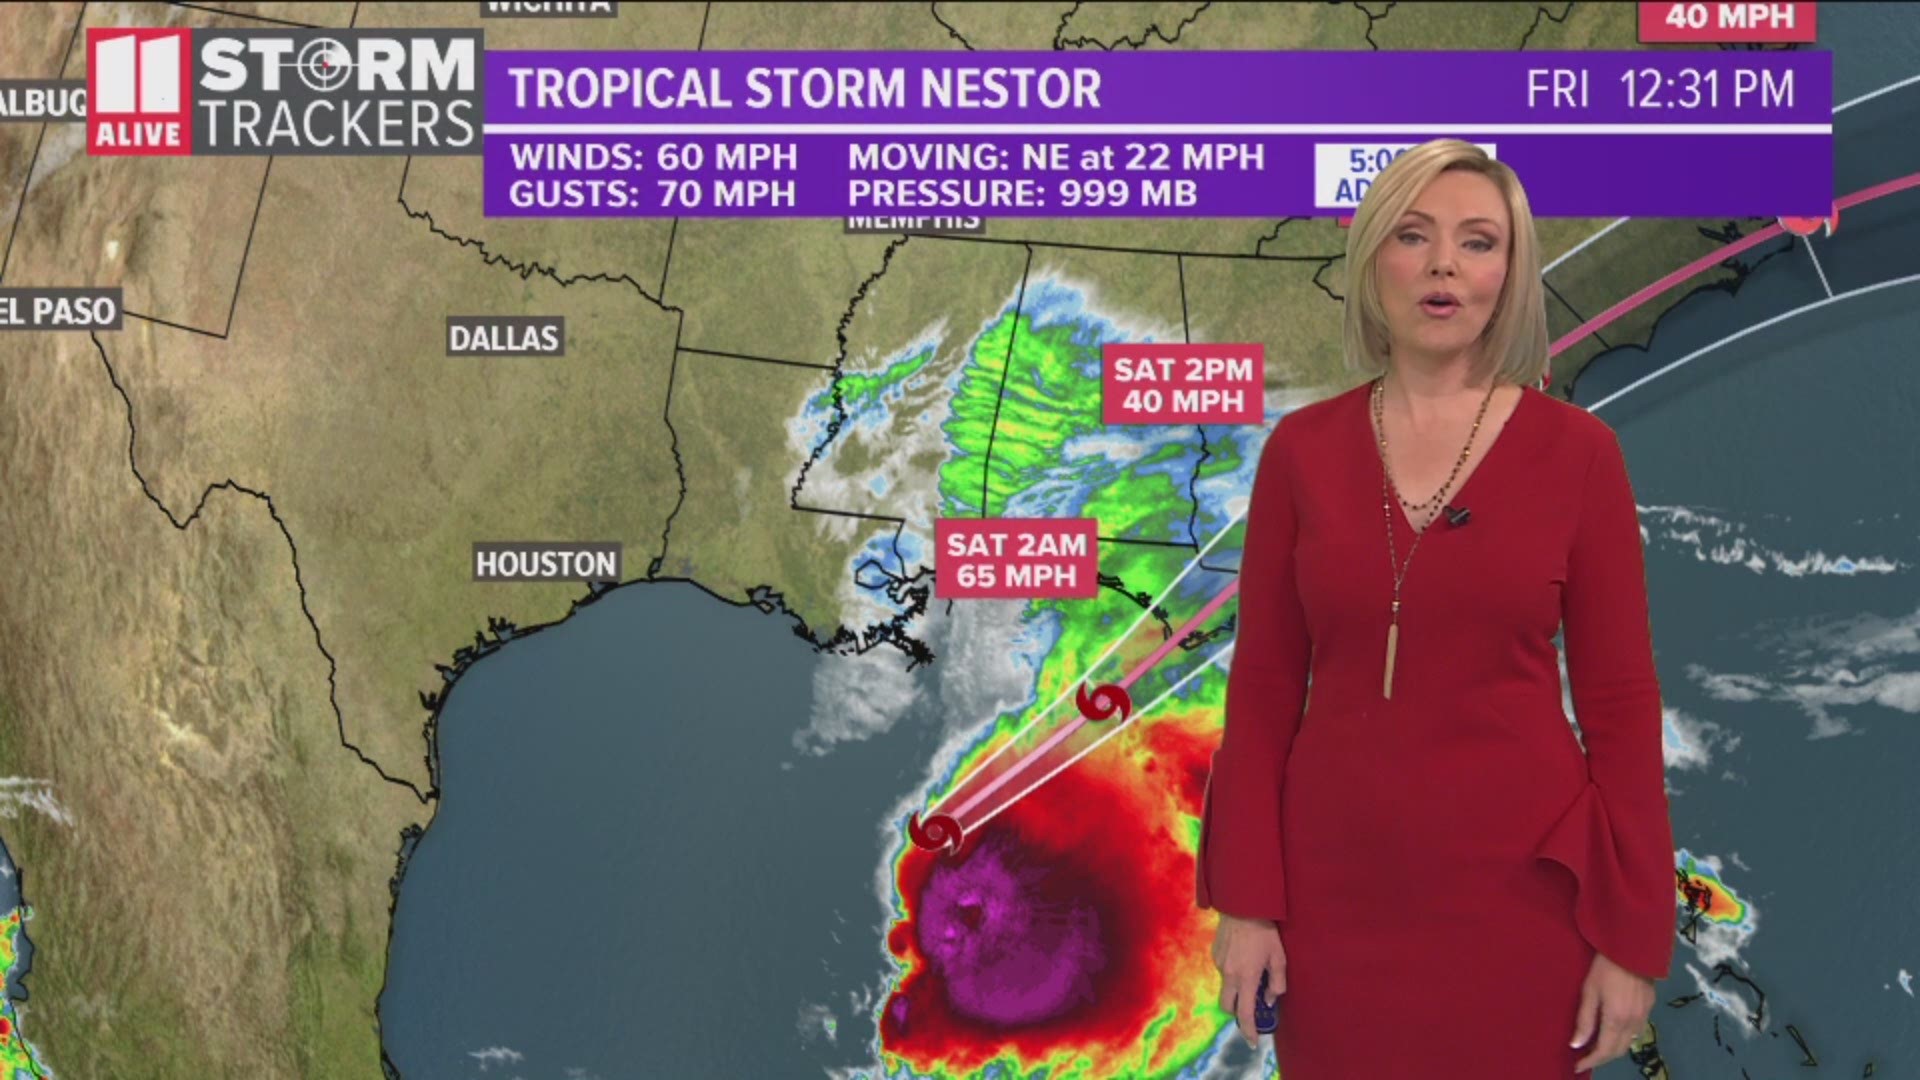 The Stormtrackers will be busy following Nestor over the weekend